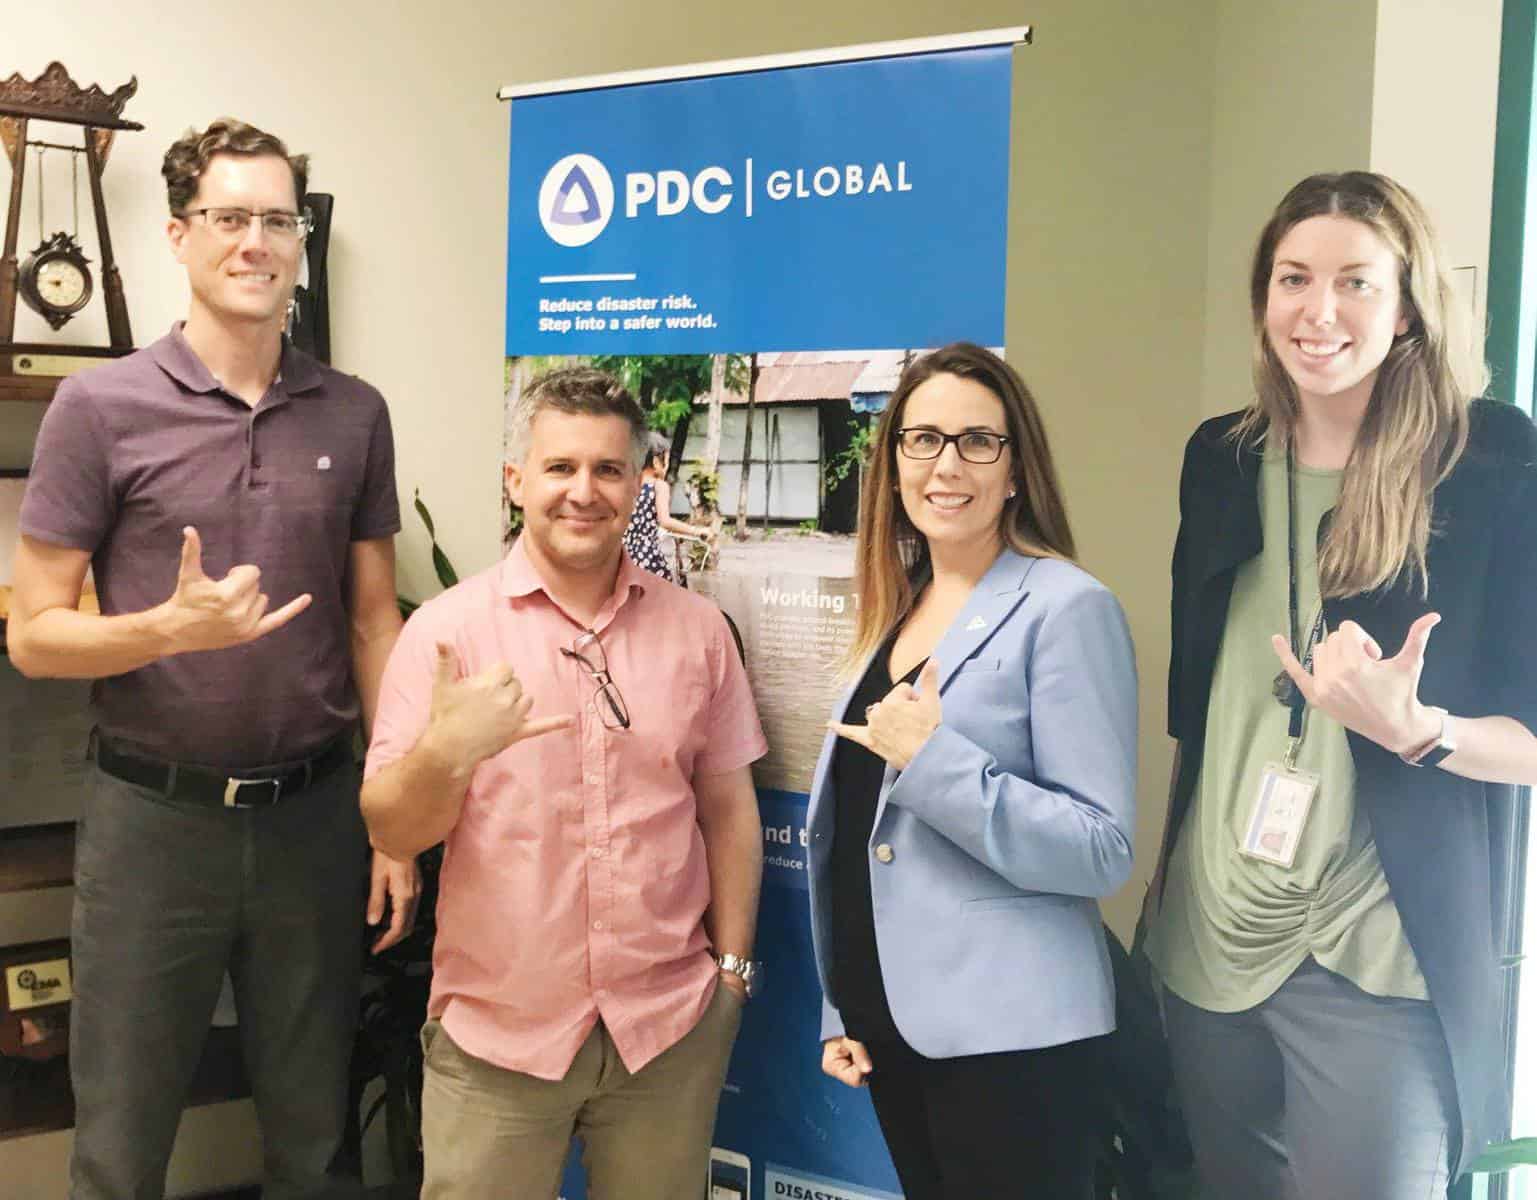 Left to right: PDC Disaster Management Specialist Todd Bosse; Regional Information Management Officer with UNOCHA ROAP John Marinos; PDC Director of Disaster Services Dr. Erin Hughey; PDC Disaster Services Analyst Cassie Stelow .